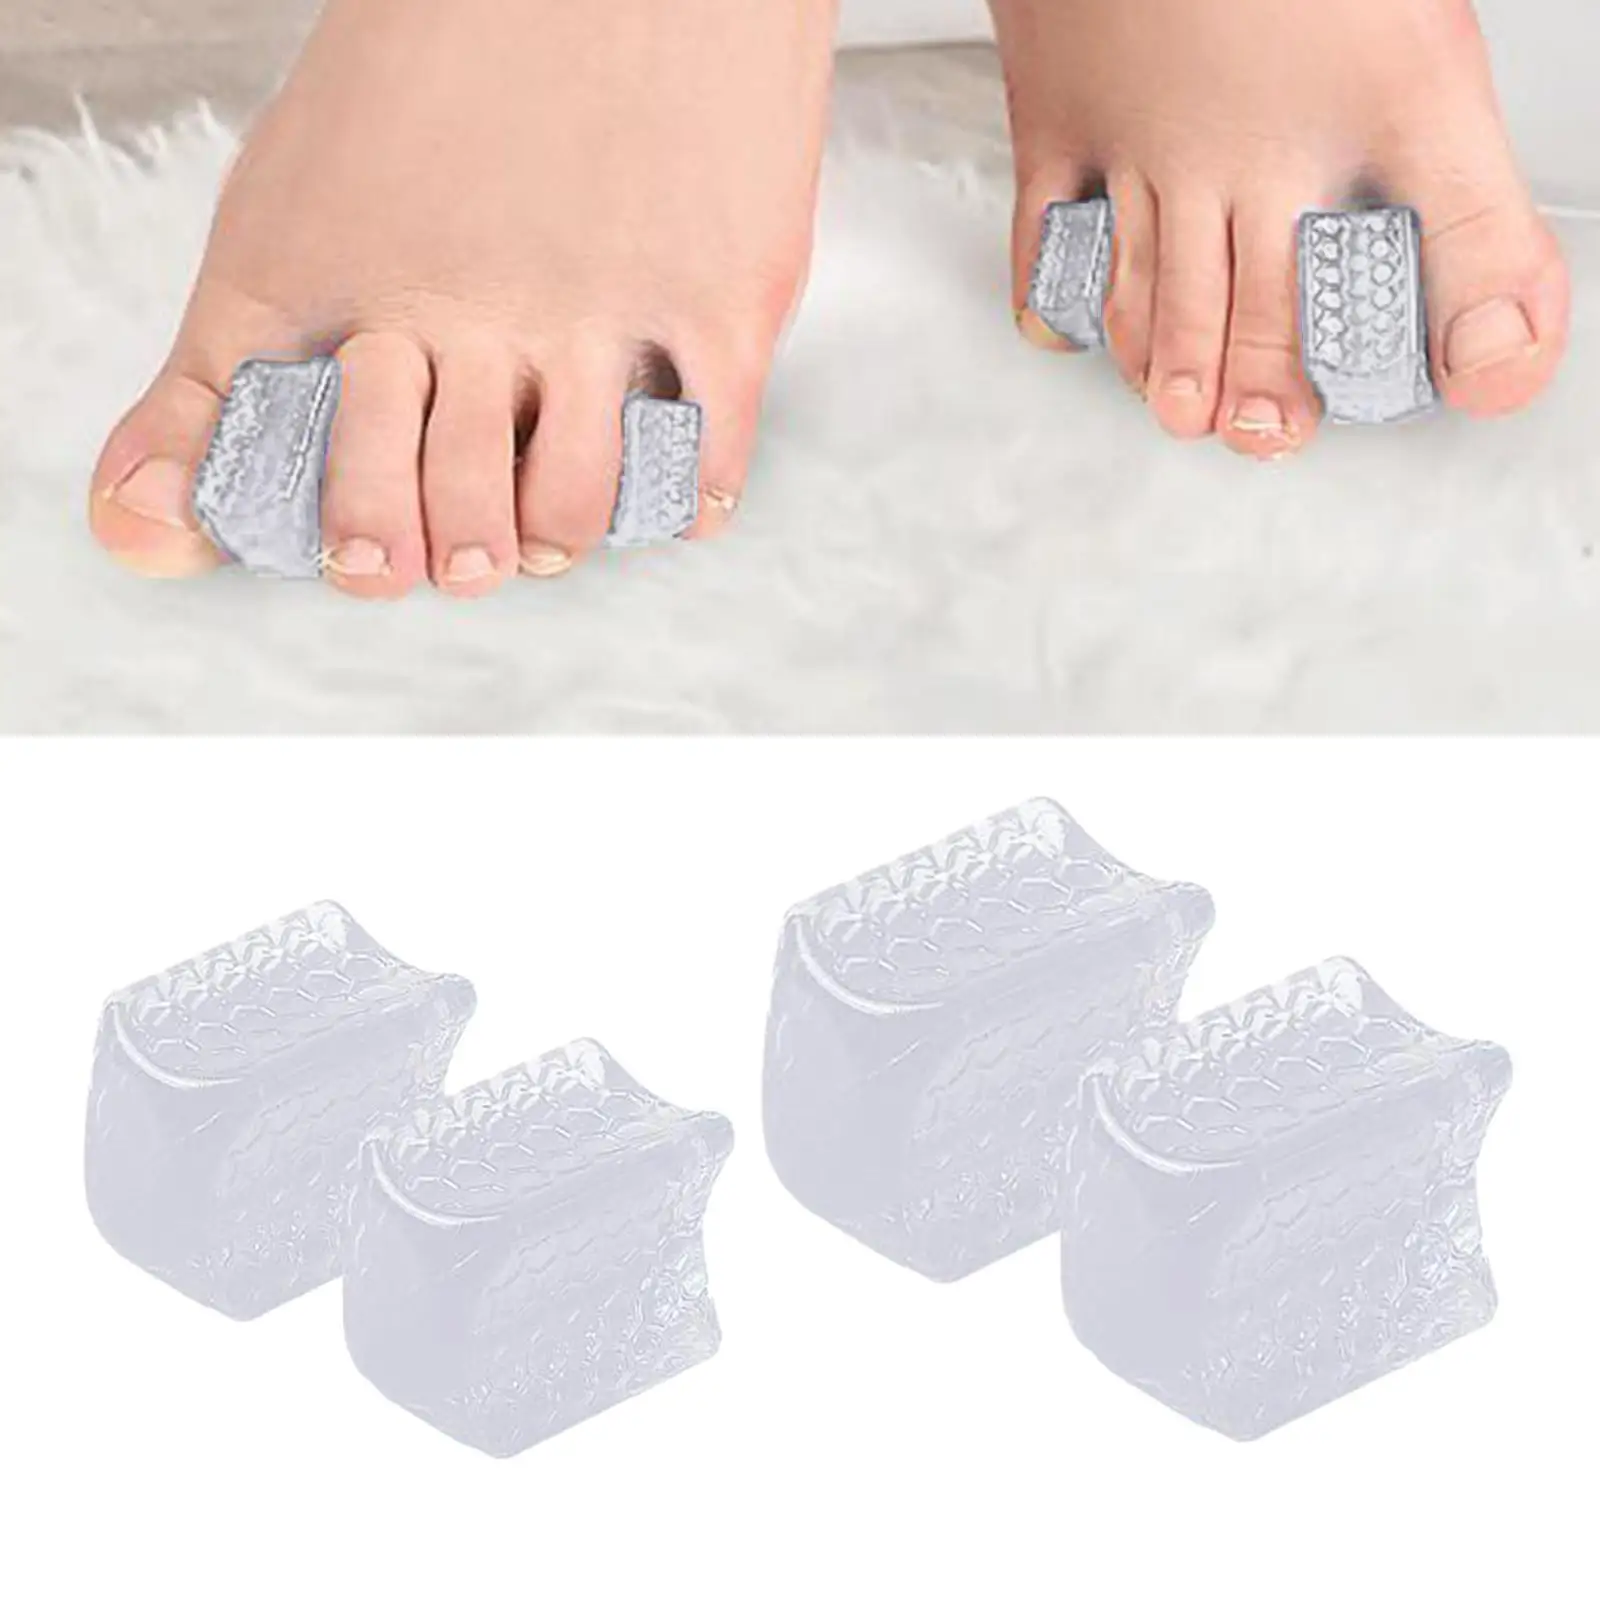 4Pcs SilicToe Separators Stretcher Separate Curled Overlapping Toe